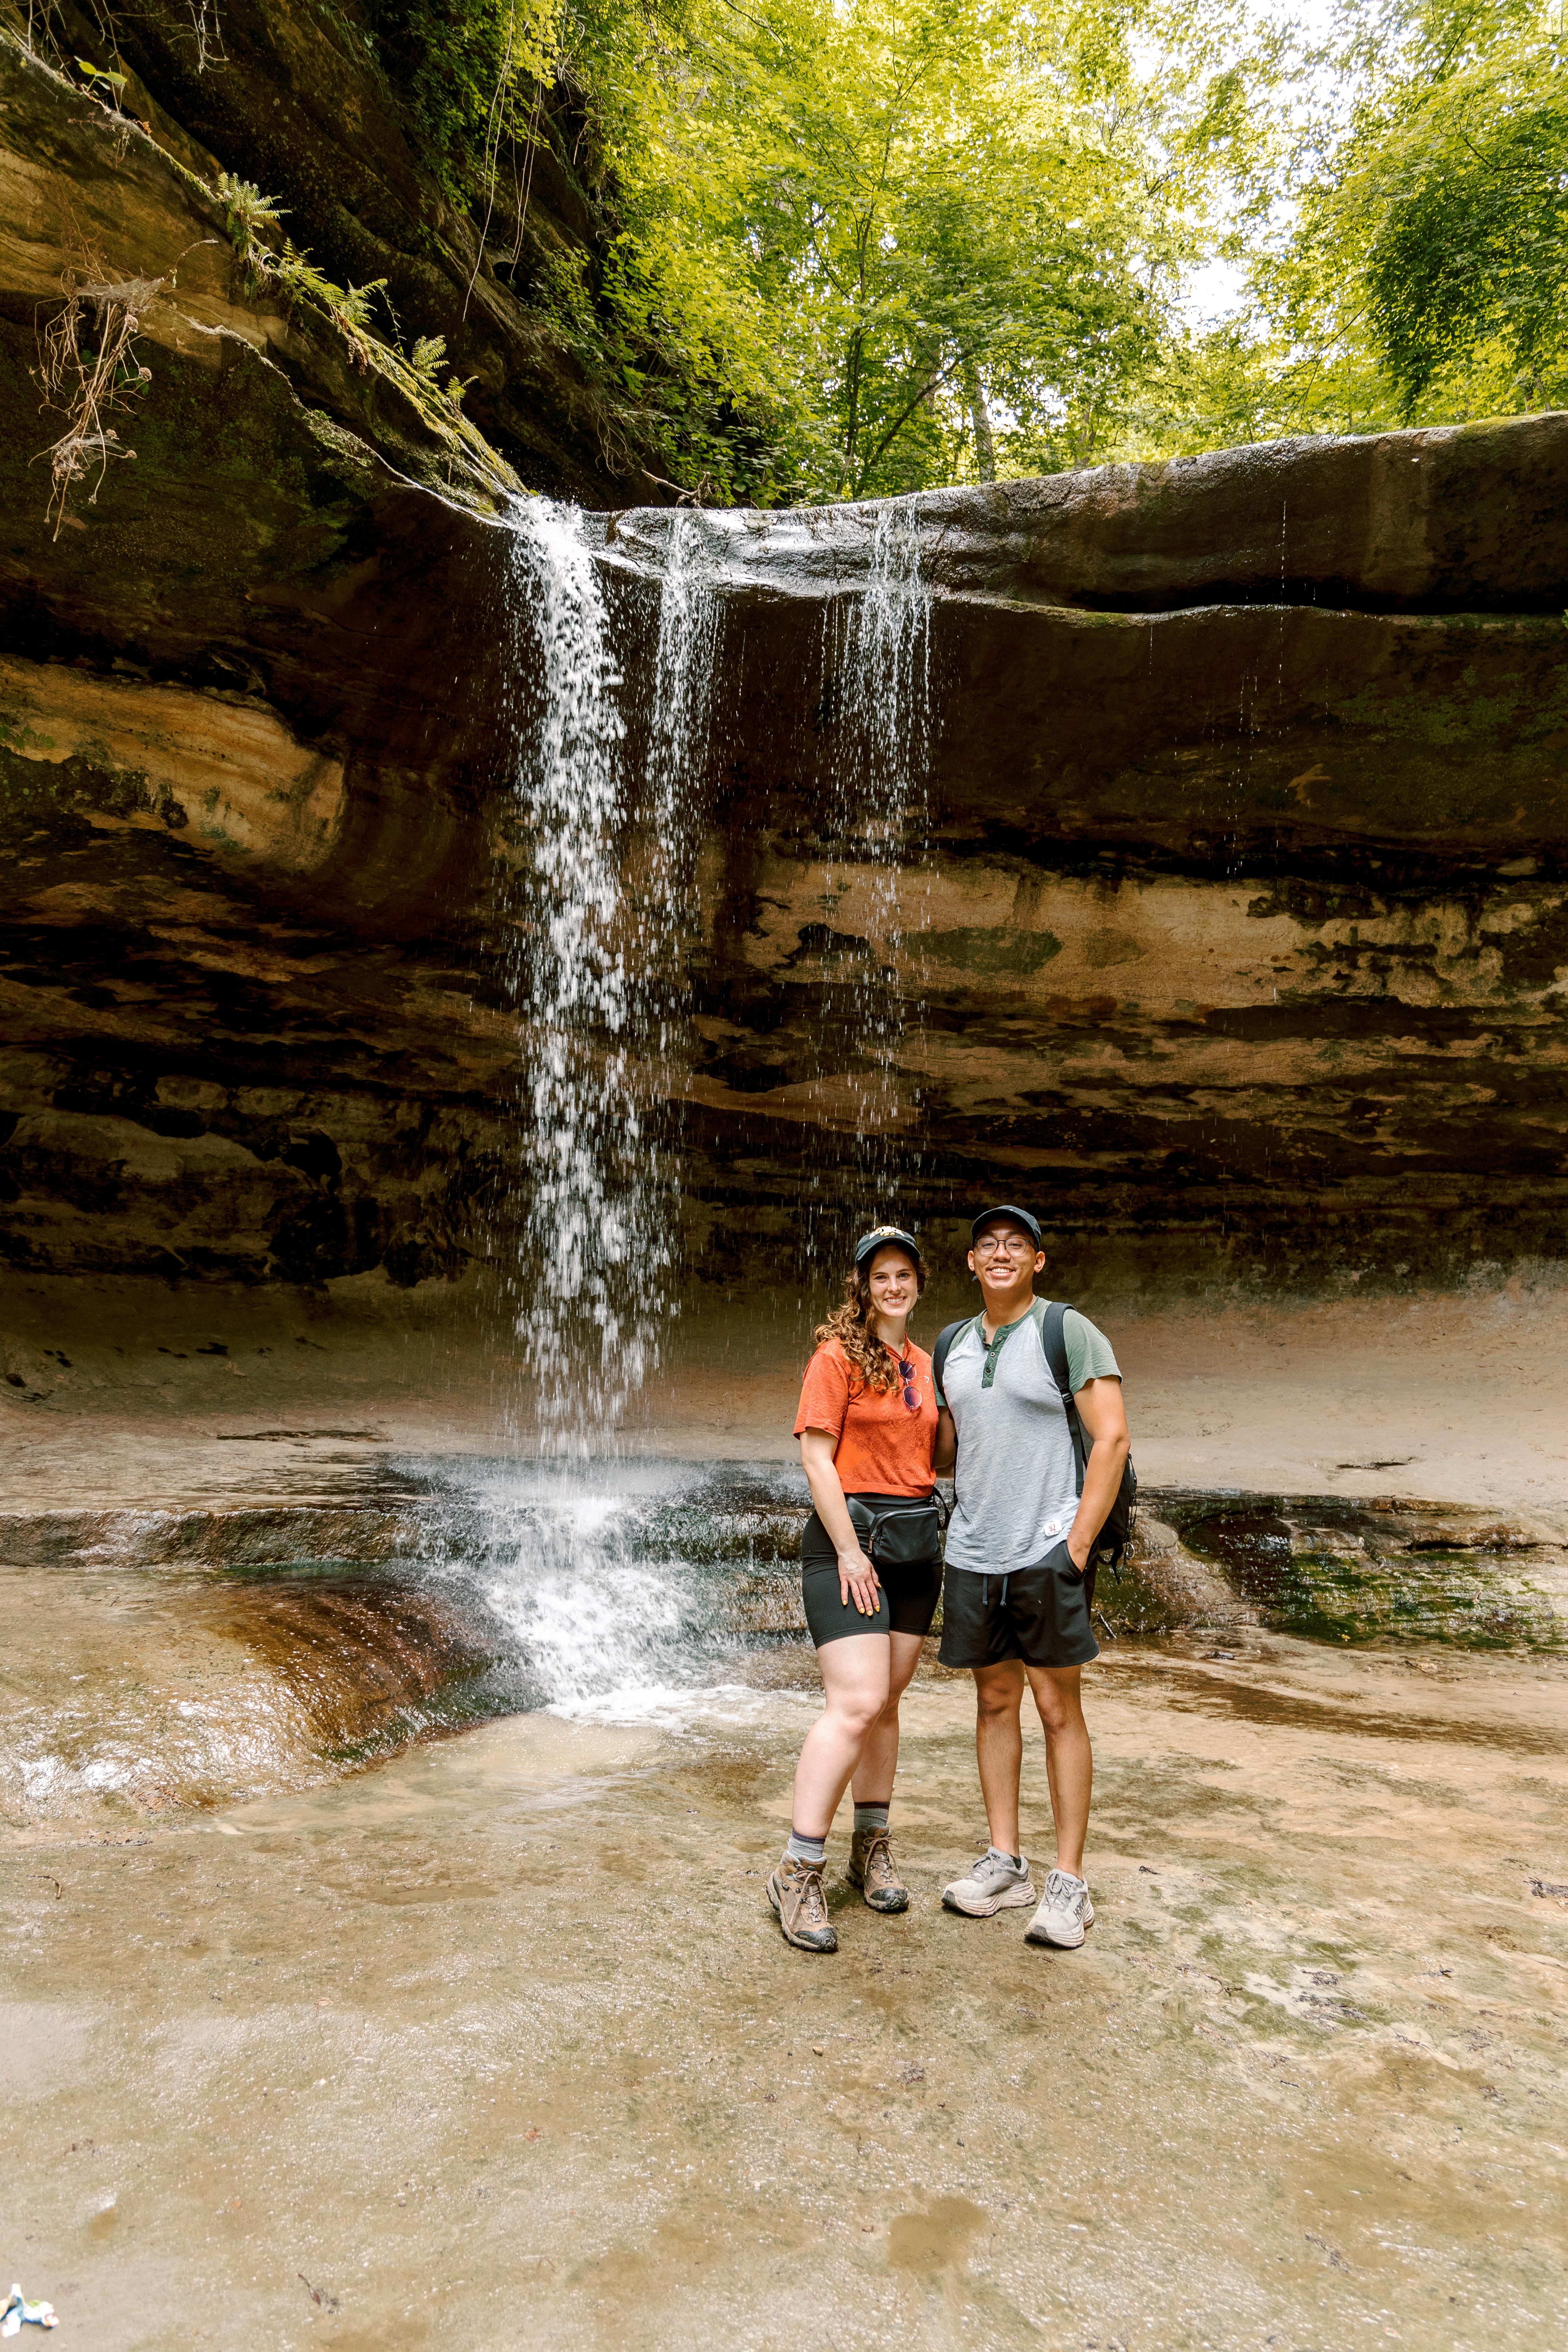 Memorial Day Weekend at Starved Rock